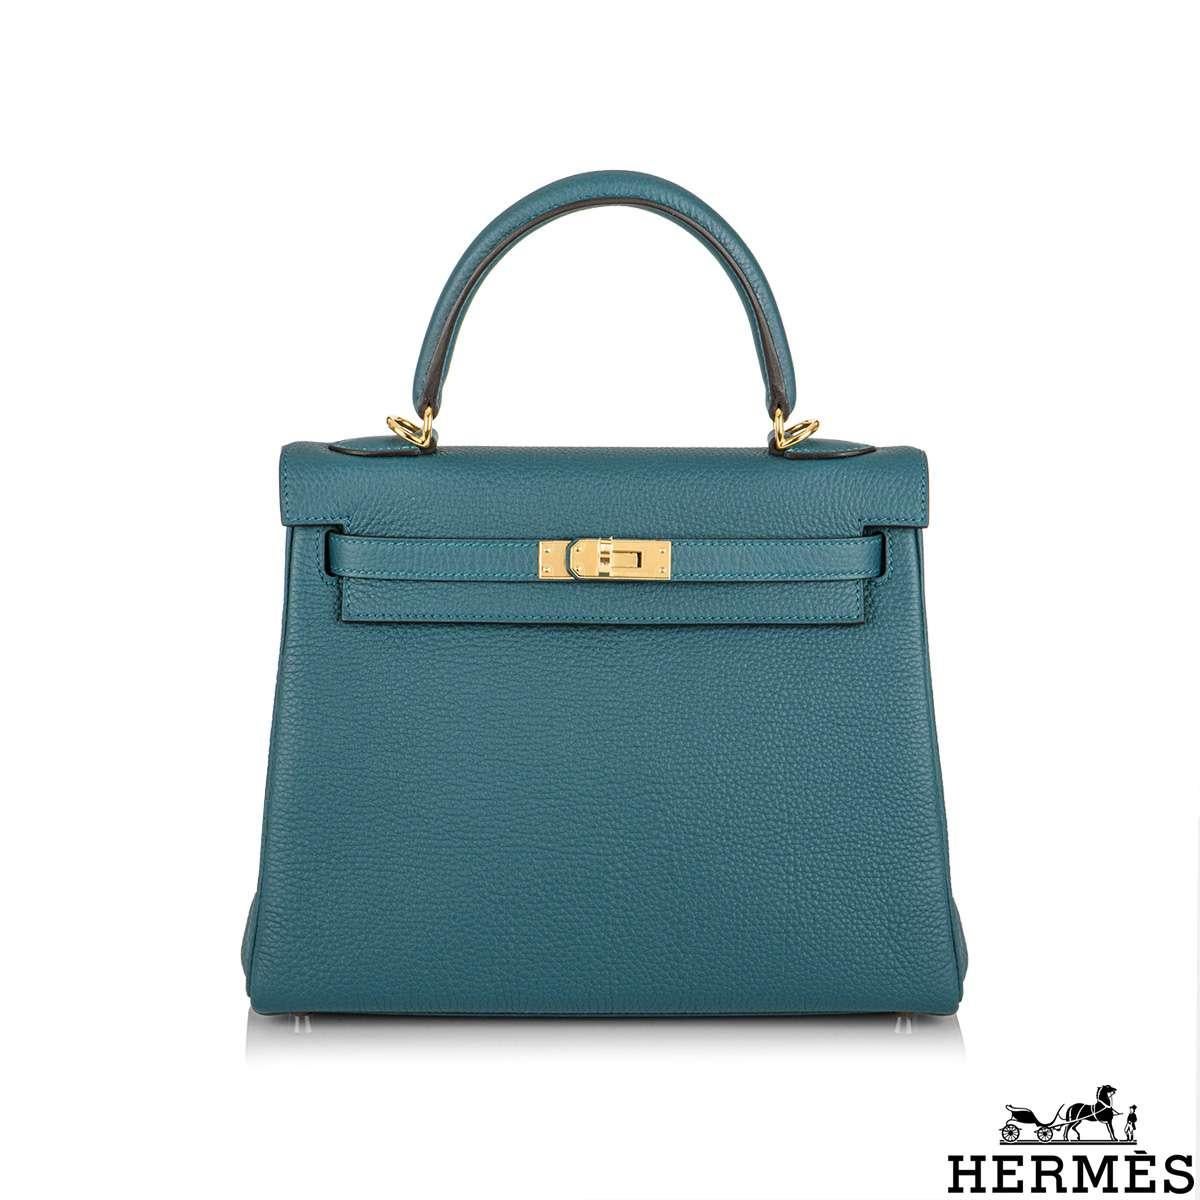 An exquisite Hermès Kelly II Retourne 25cm Vert Bosphore Handbag. The vivid vert bosphore colour is complimented with gold hardware. The exterior of this Kelly features a Retourne style in vert bosphore togo leather. It has a front toggle closure, a